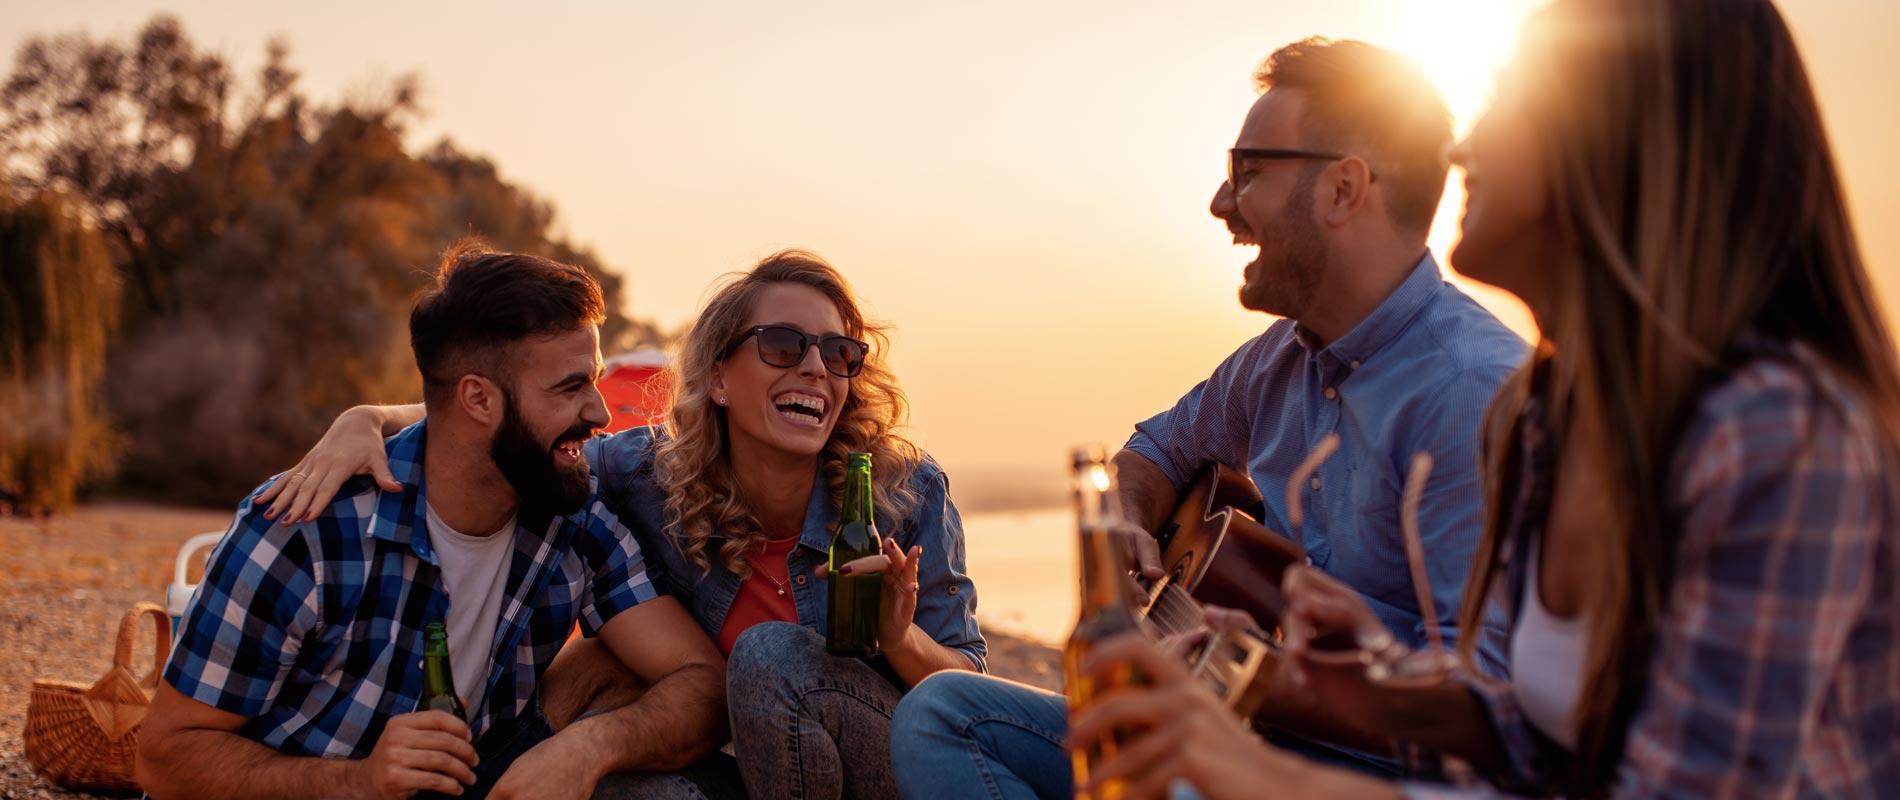 Four friends laughing with beers and guitar playing at campsite